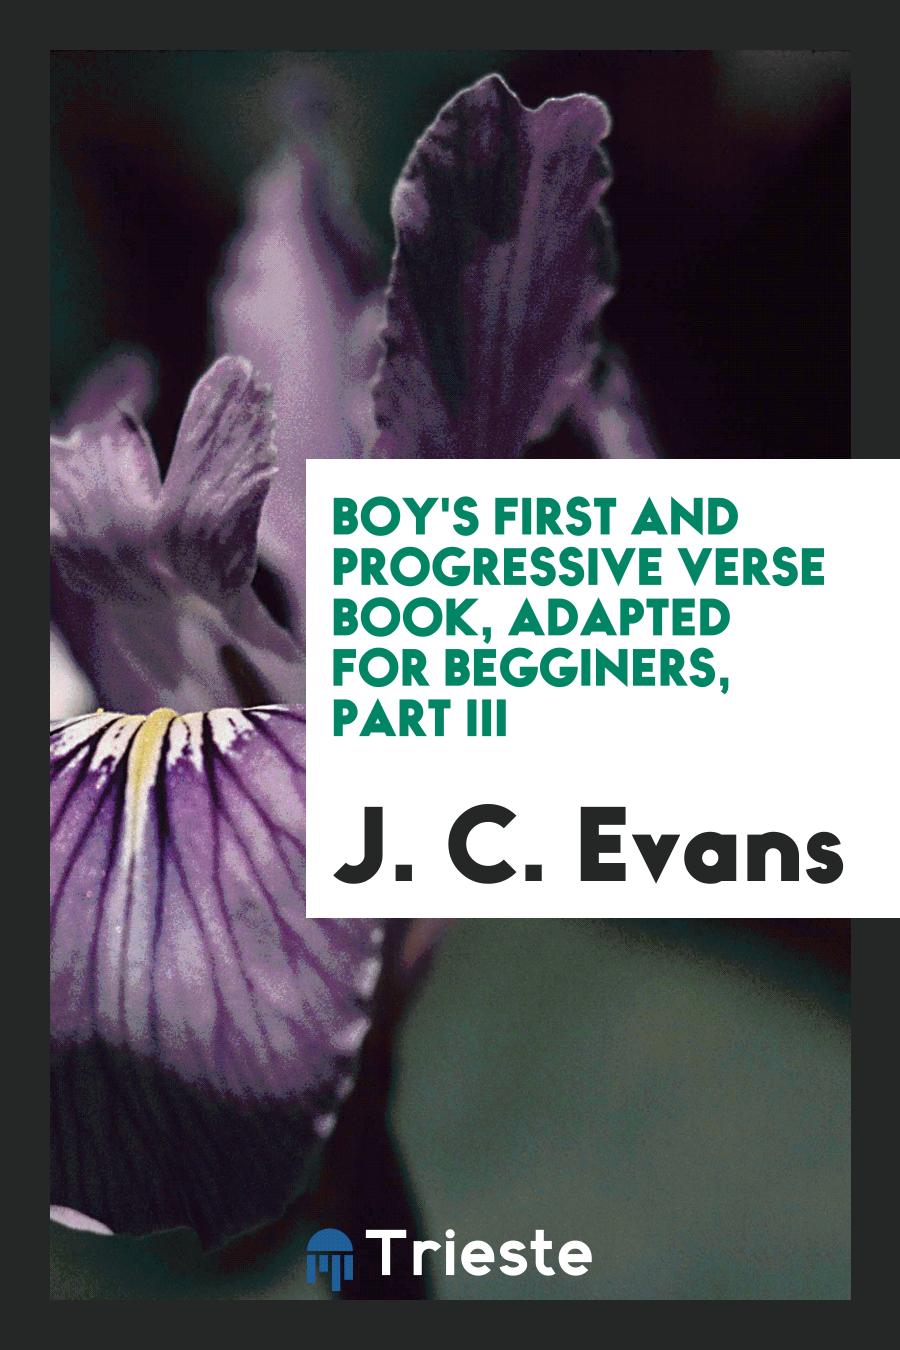 Boy's First and Progressive Verse Book, Adapted for Begginers, Part III